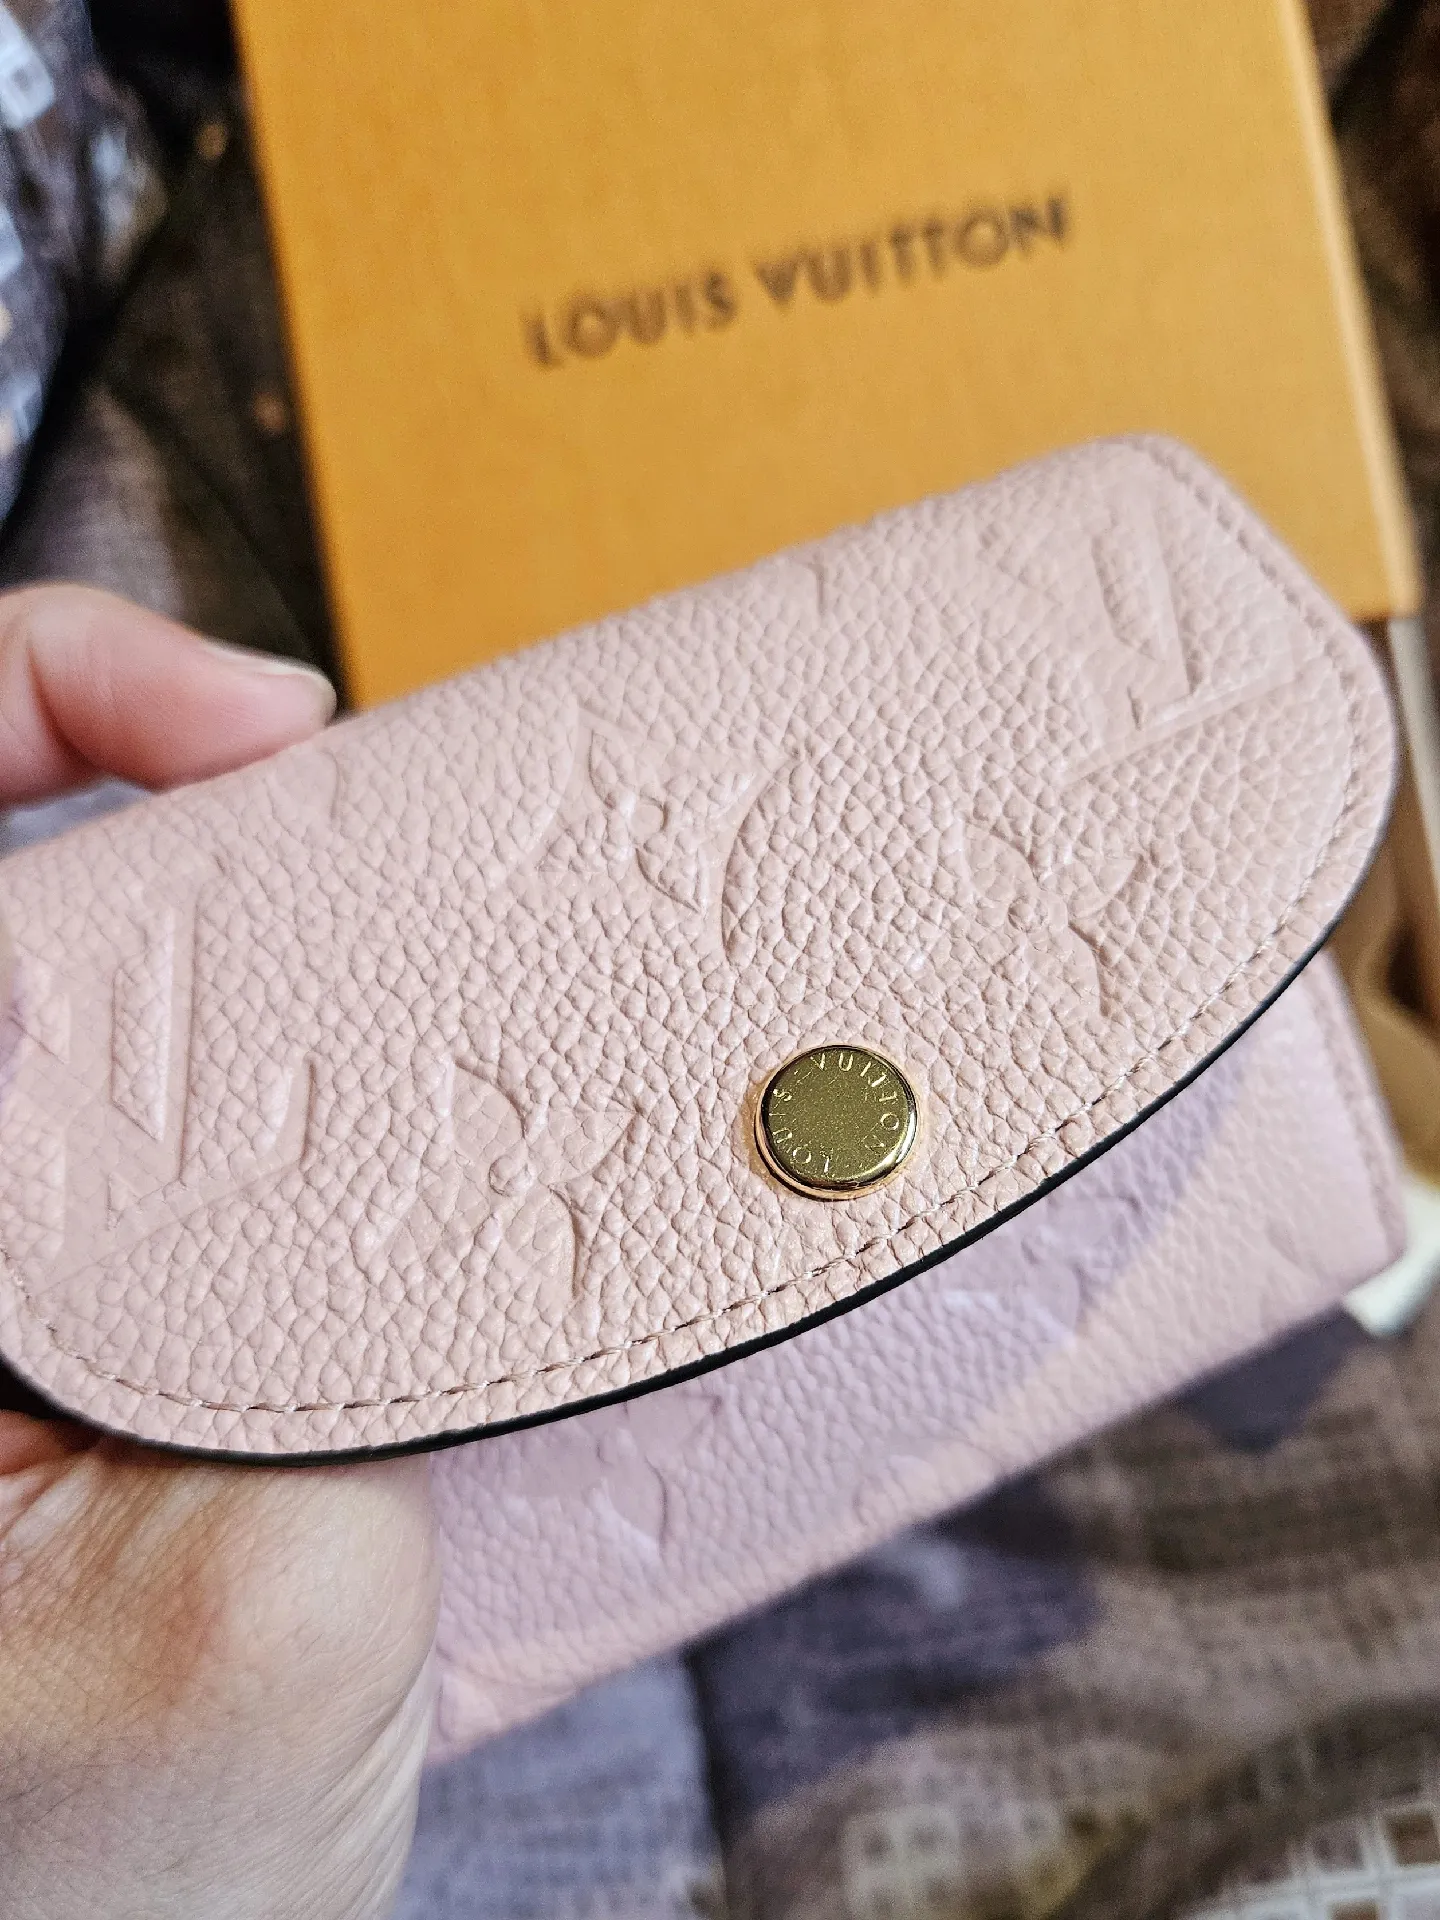 LV Card Holder, Gallery posted by Chaniga P.